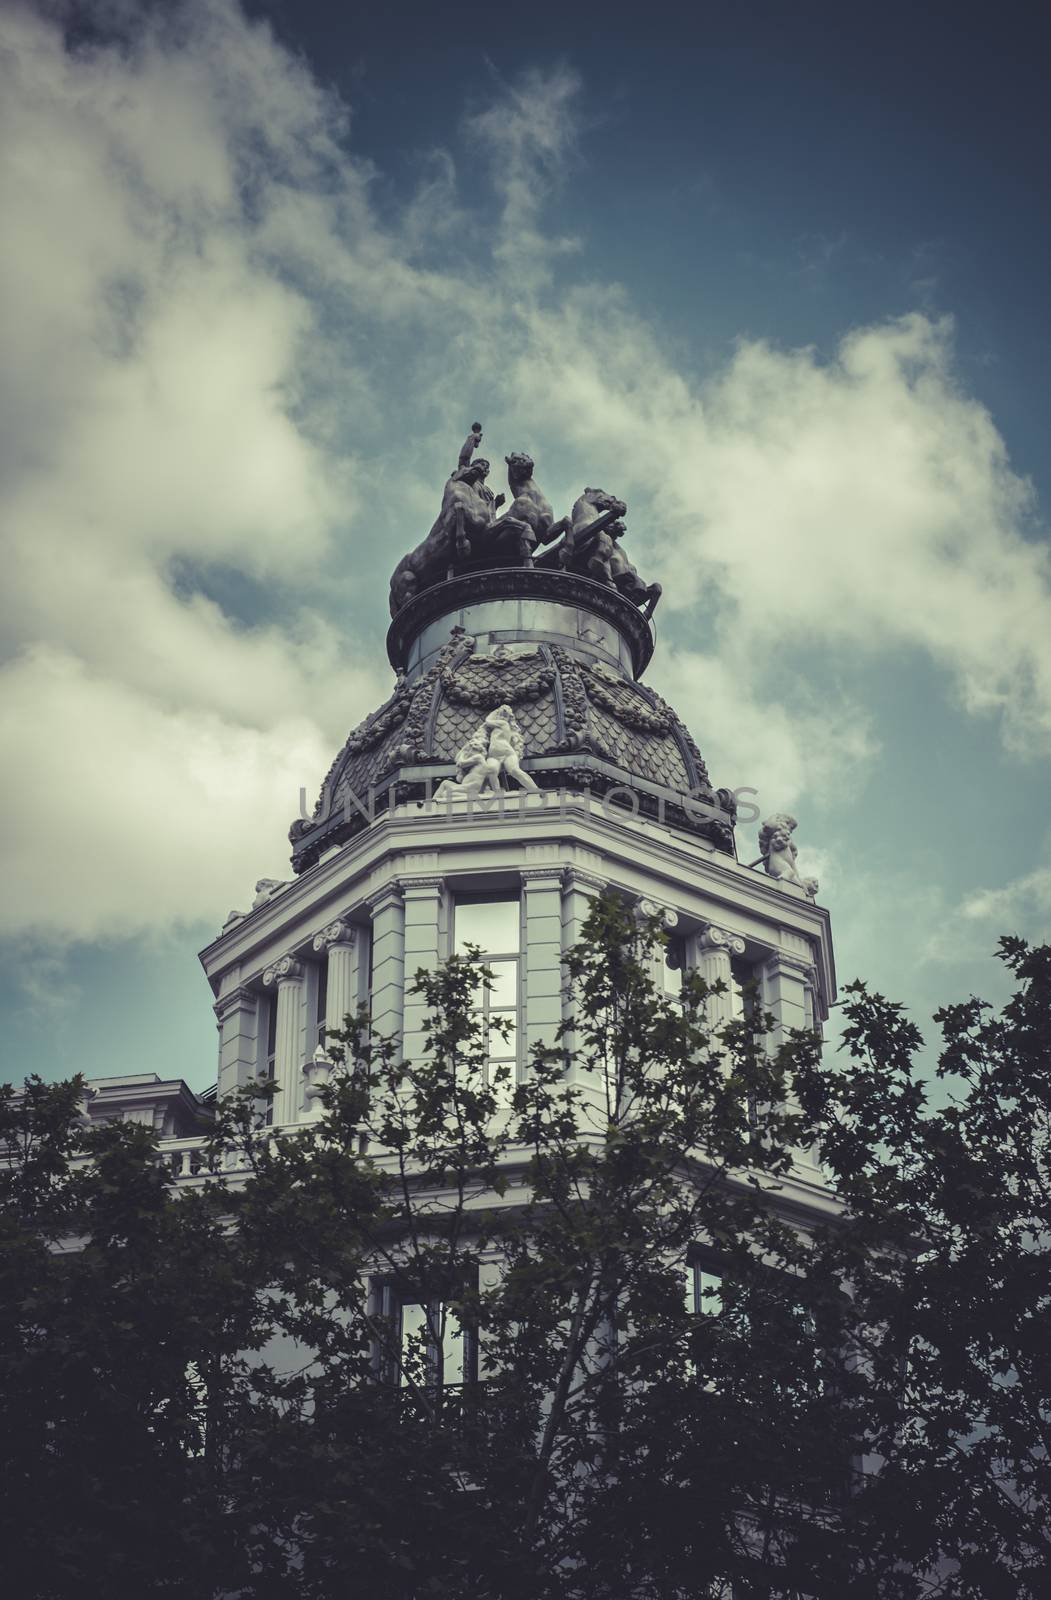 Gran via, Image of the city of Madrid, its characteristic archit by FernandoCortes